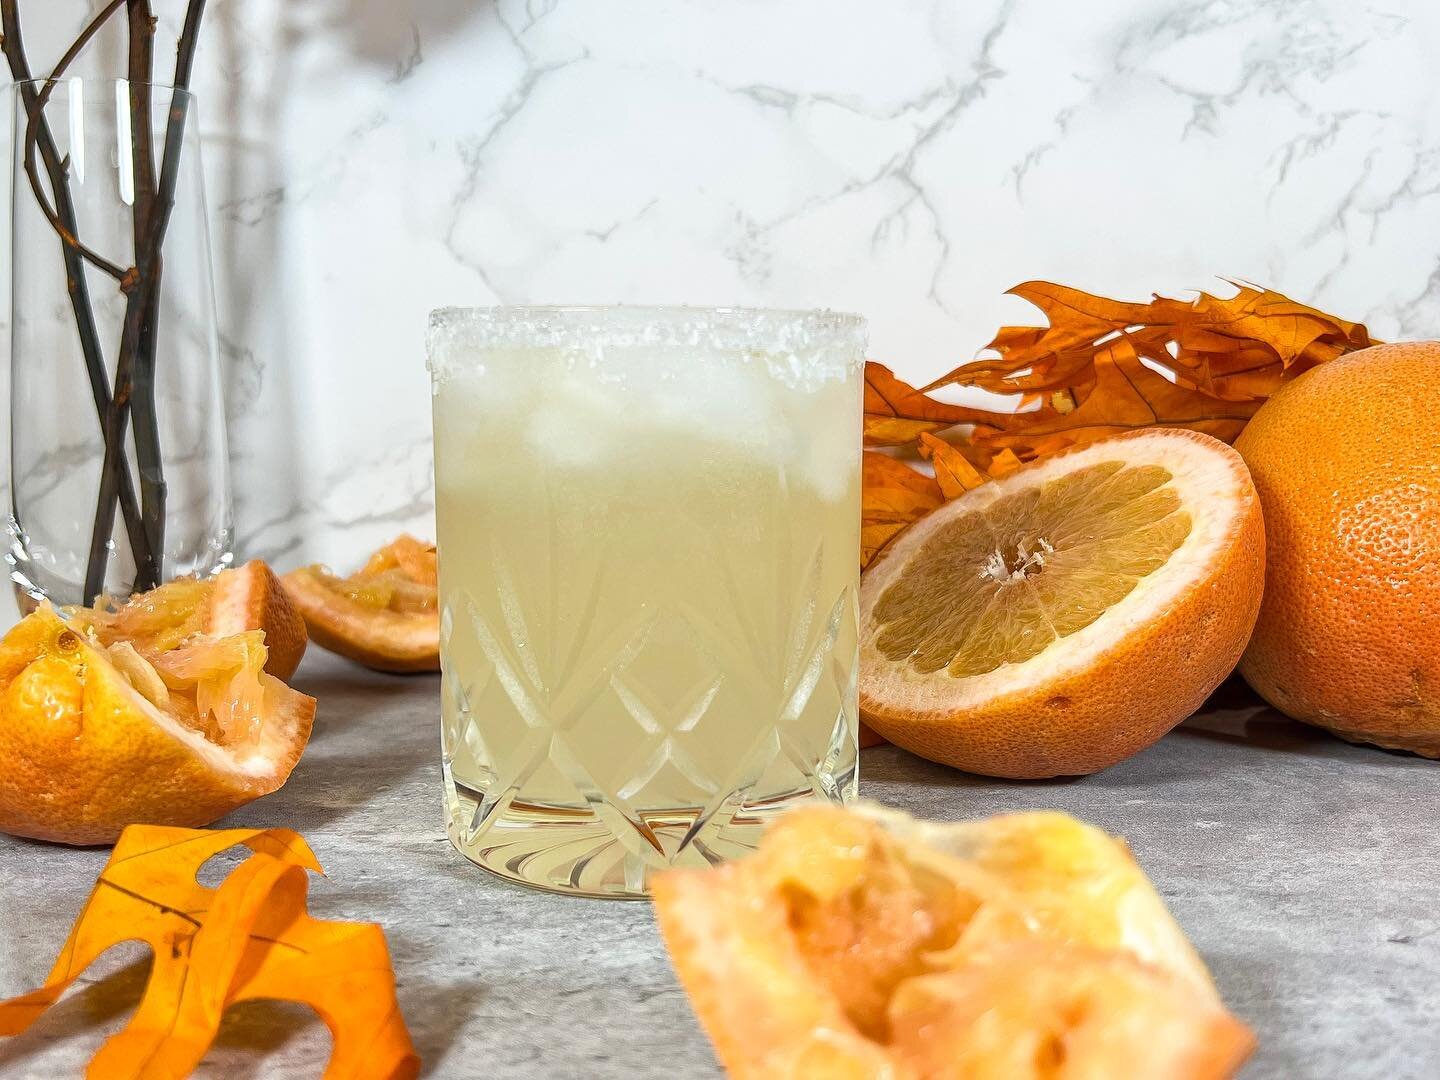 Sip Sunday: Grapefruit Margarita 🍊

I&rsquo;m currently thriving in Mexico celebrating my husband&rsquo;s birthday so I wanted to make a cocktail representative of the trip! It&rsquo;s a simple twist on a classic margarita, perfect for anytime. Ingr